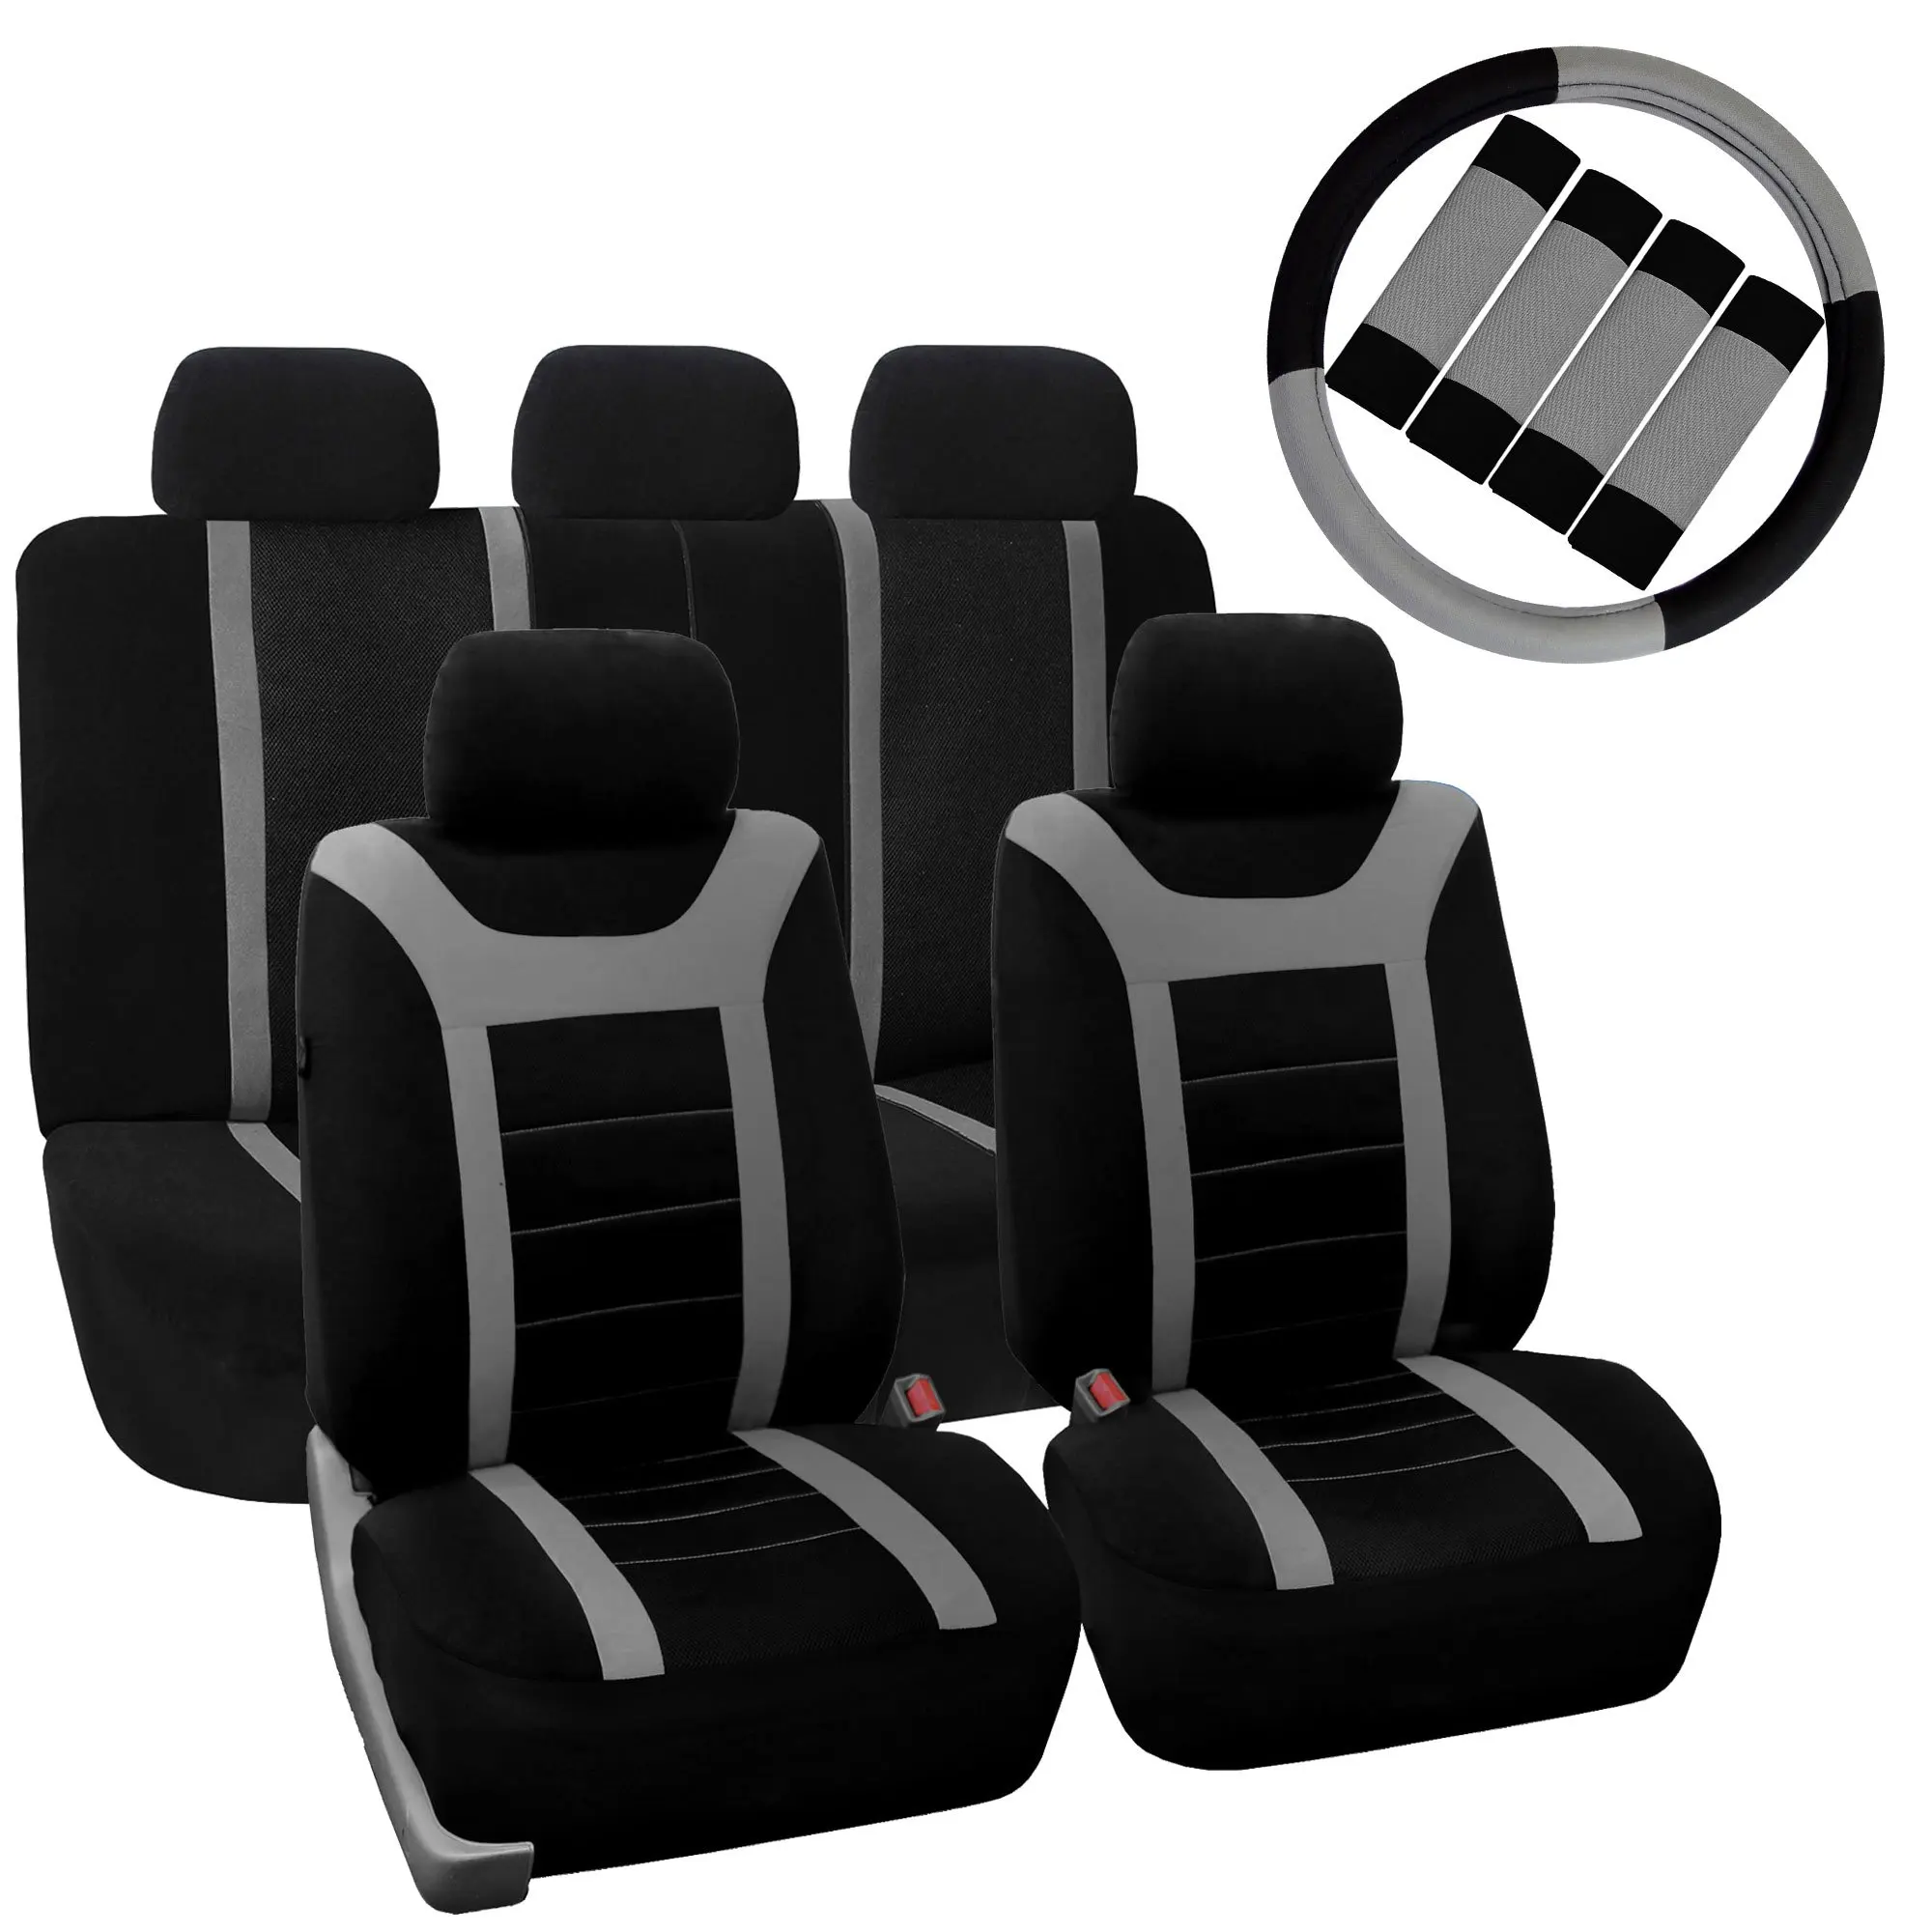 Cheap Bench Truck Seat Covers, find Bench Truck Seat Covers deals on